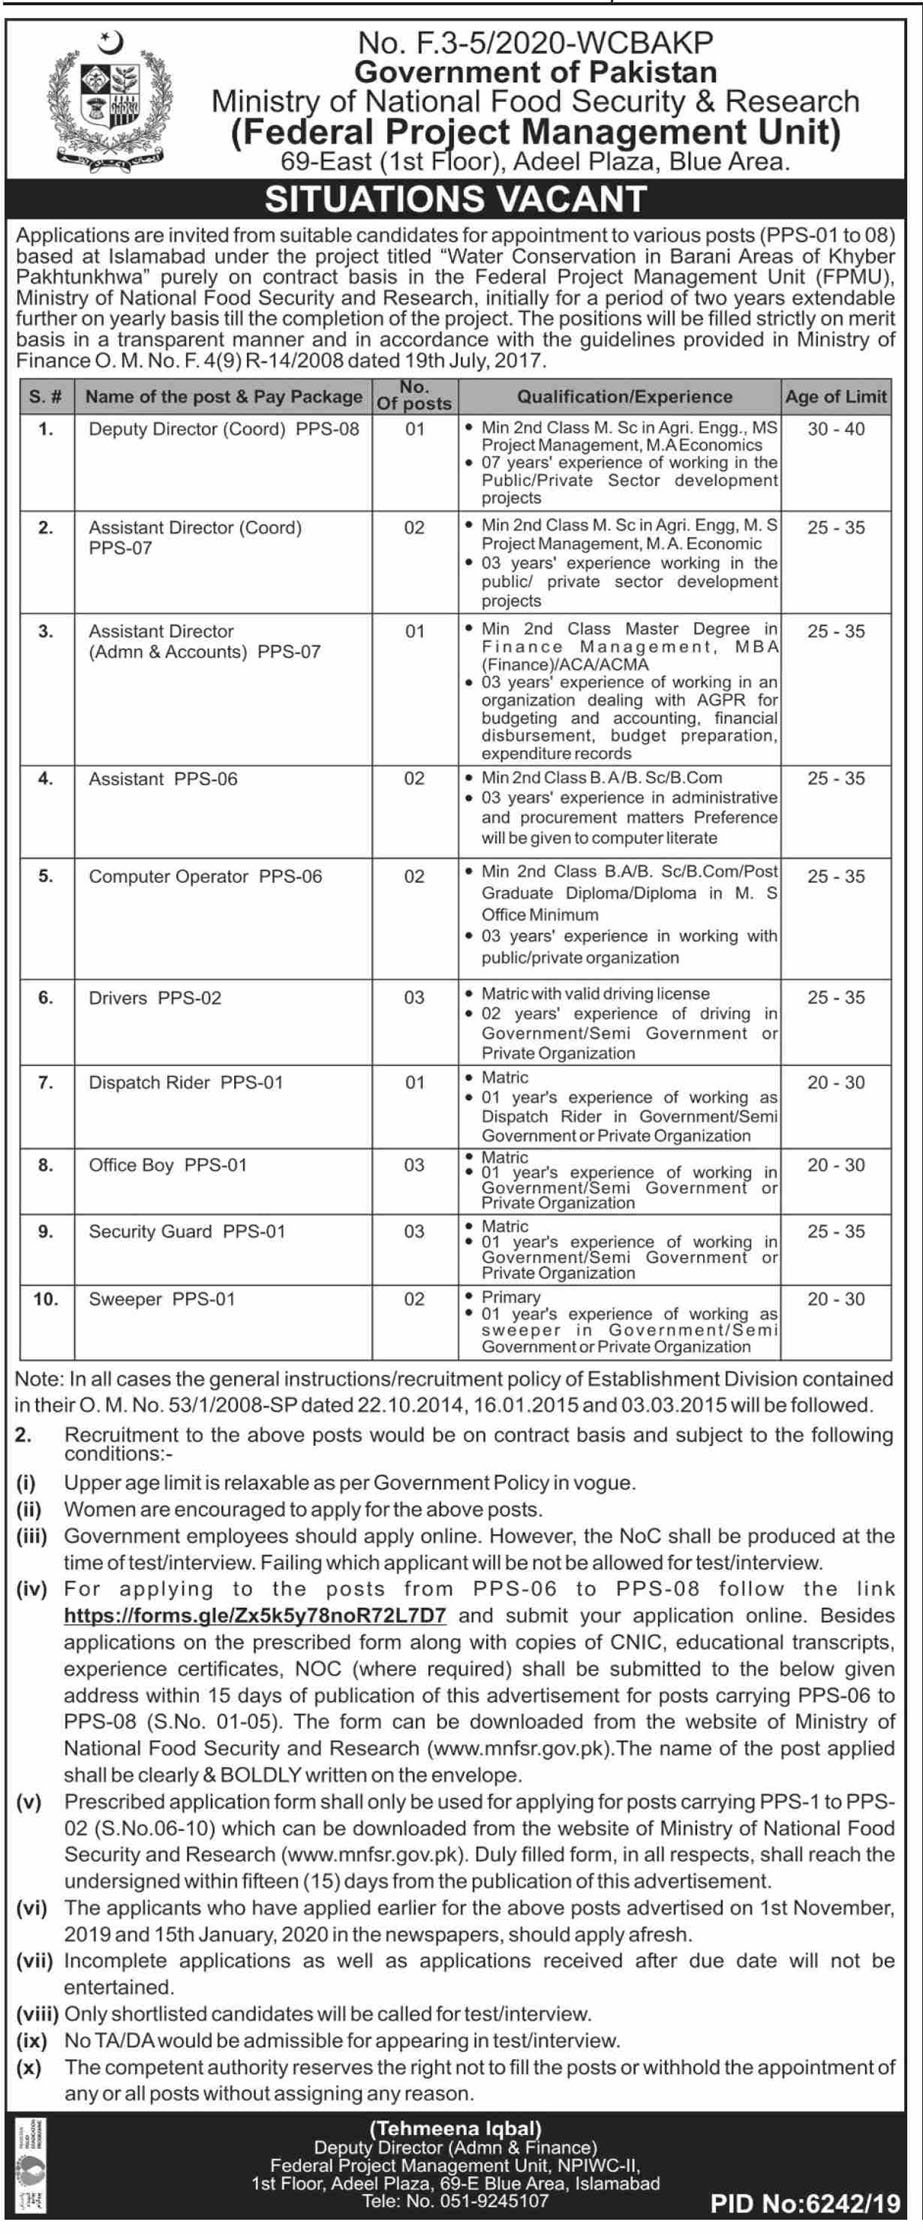 Situations Vacant in Ministry of National Food Security & Research